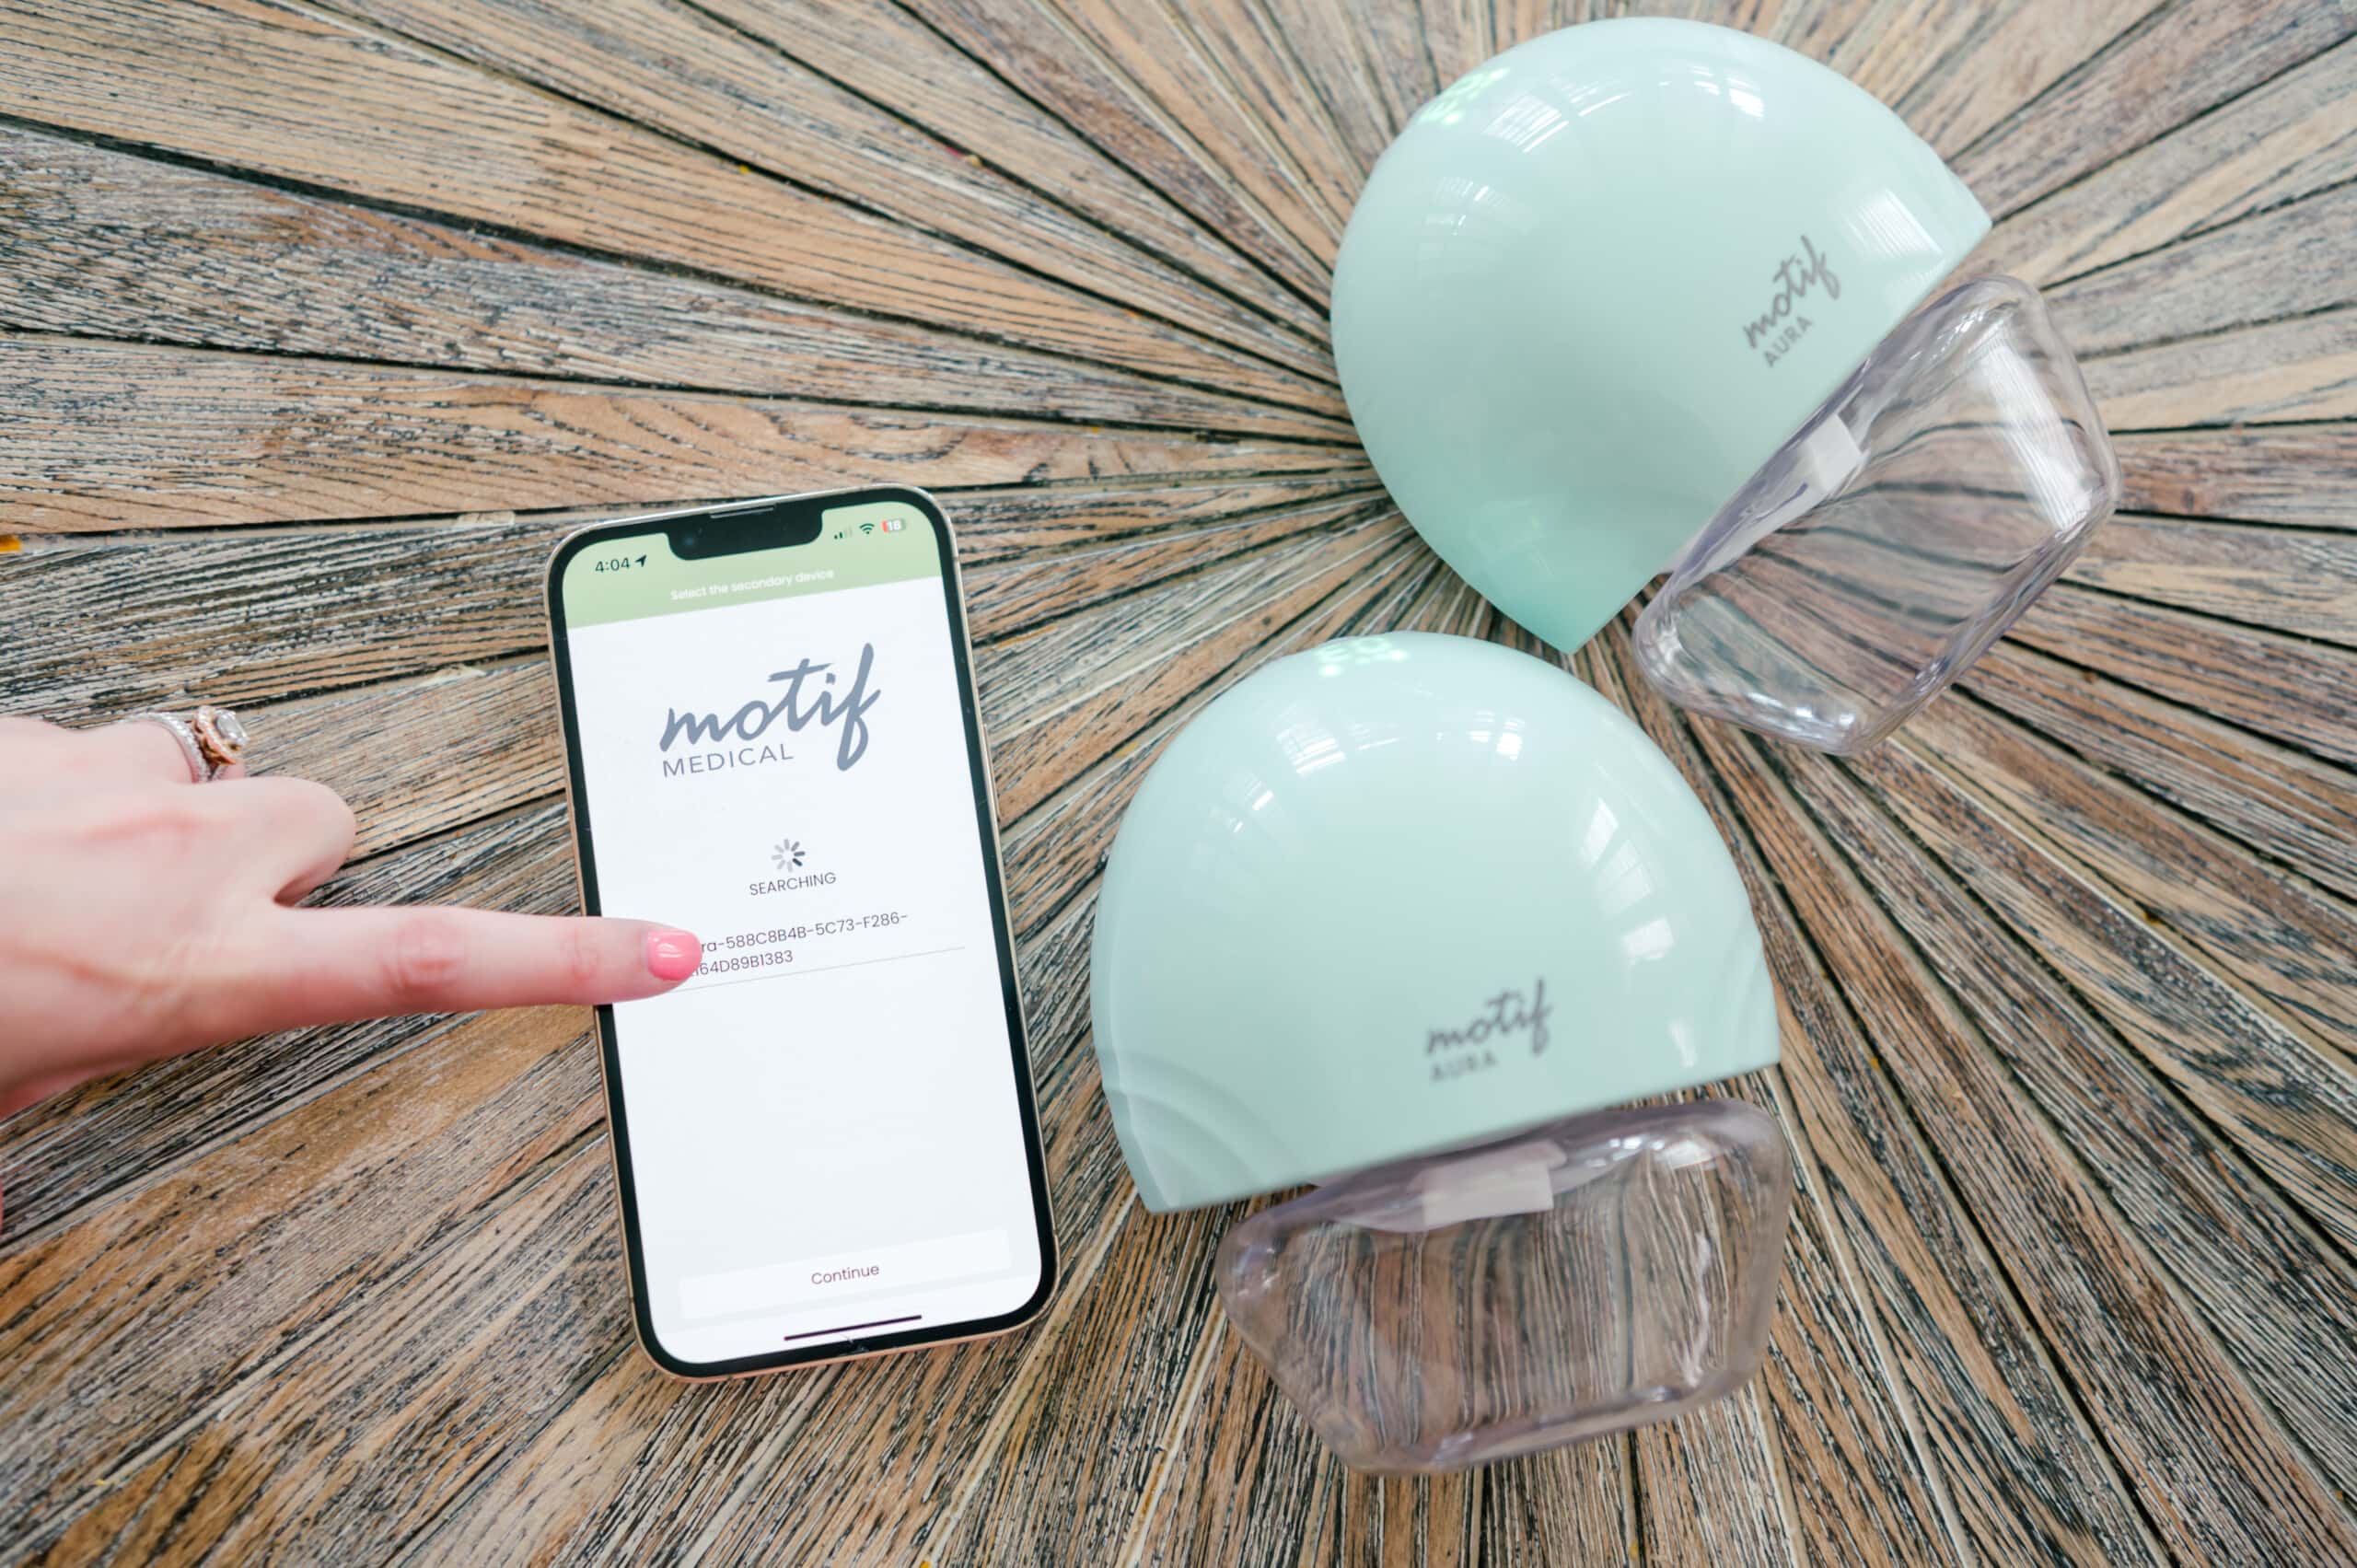 The Motif Aura breast pump on a wooden background with a smart phone showing the Motif app and a woman's hand pressing the app.